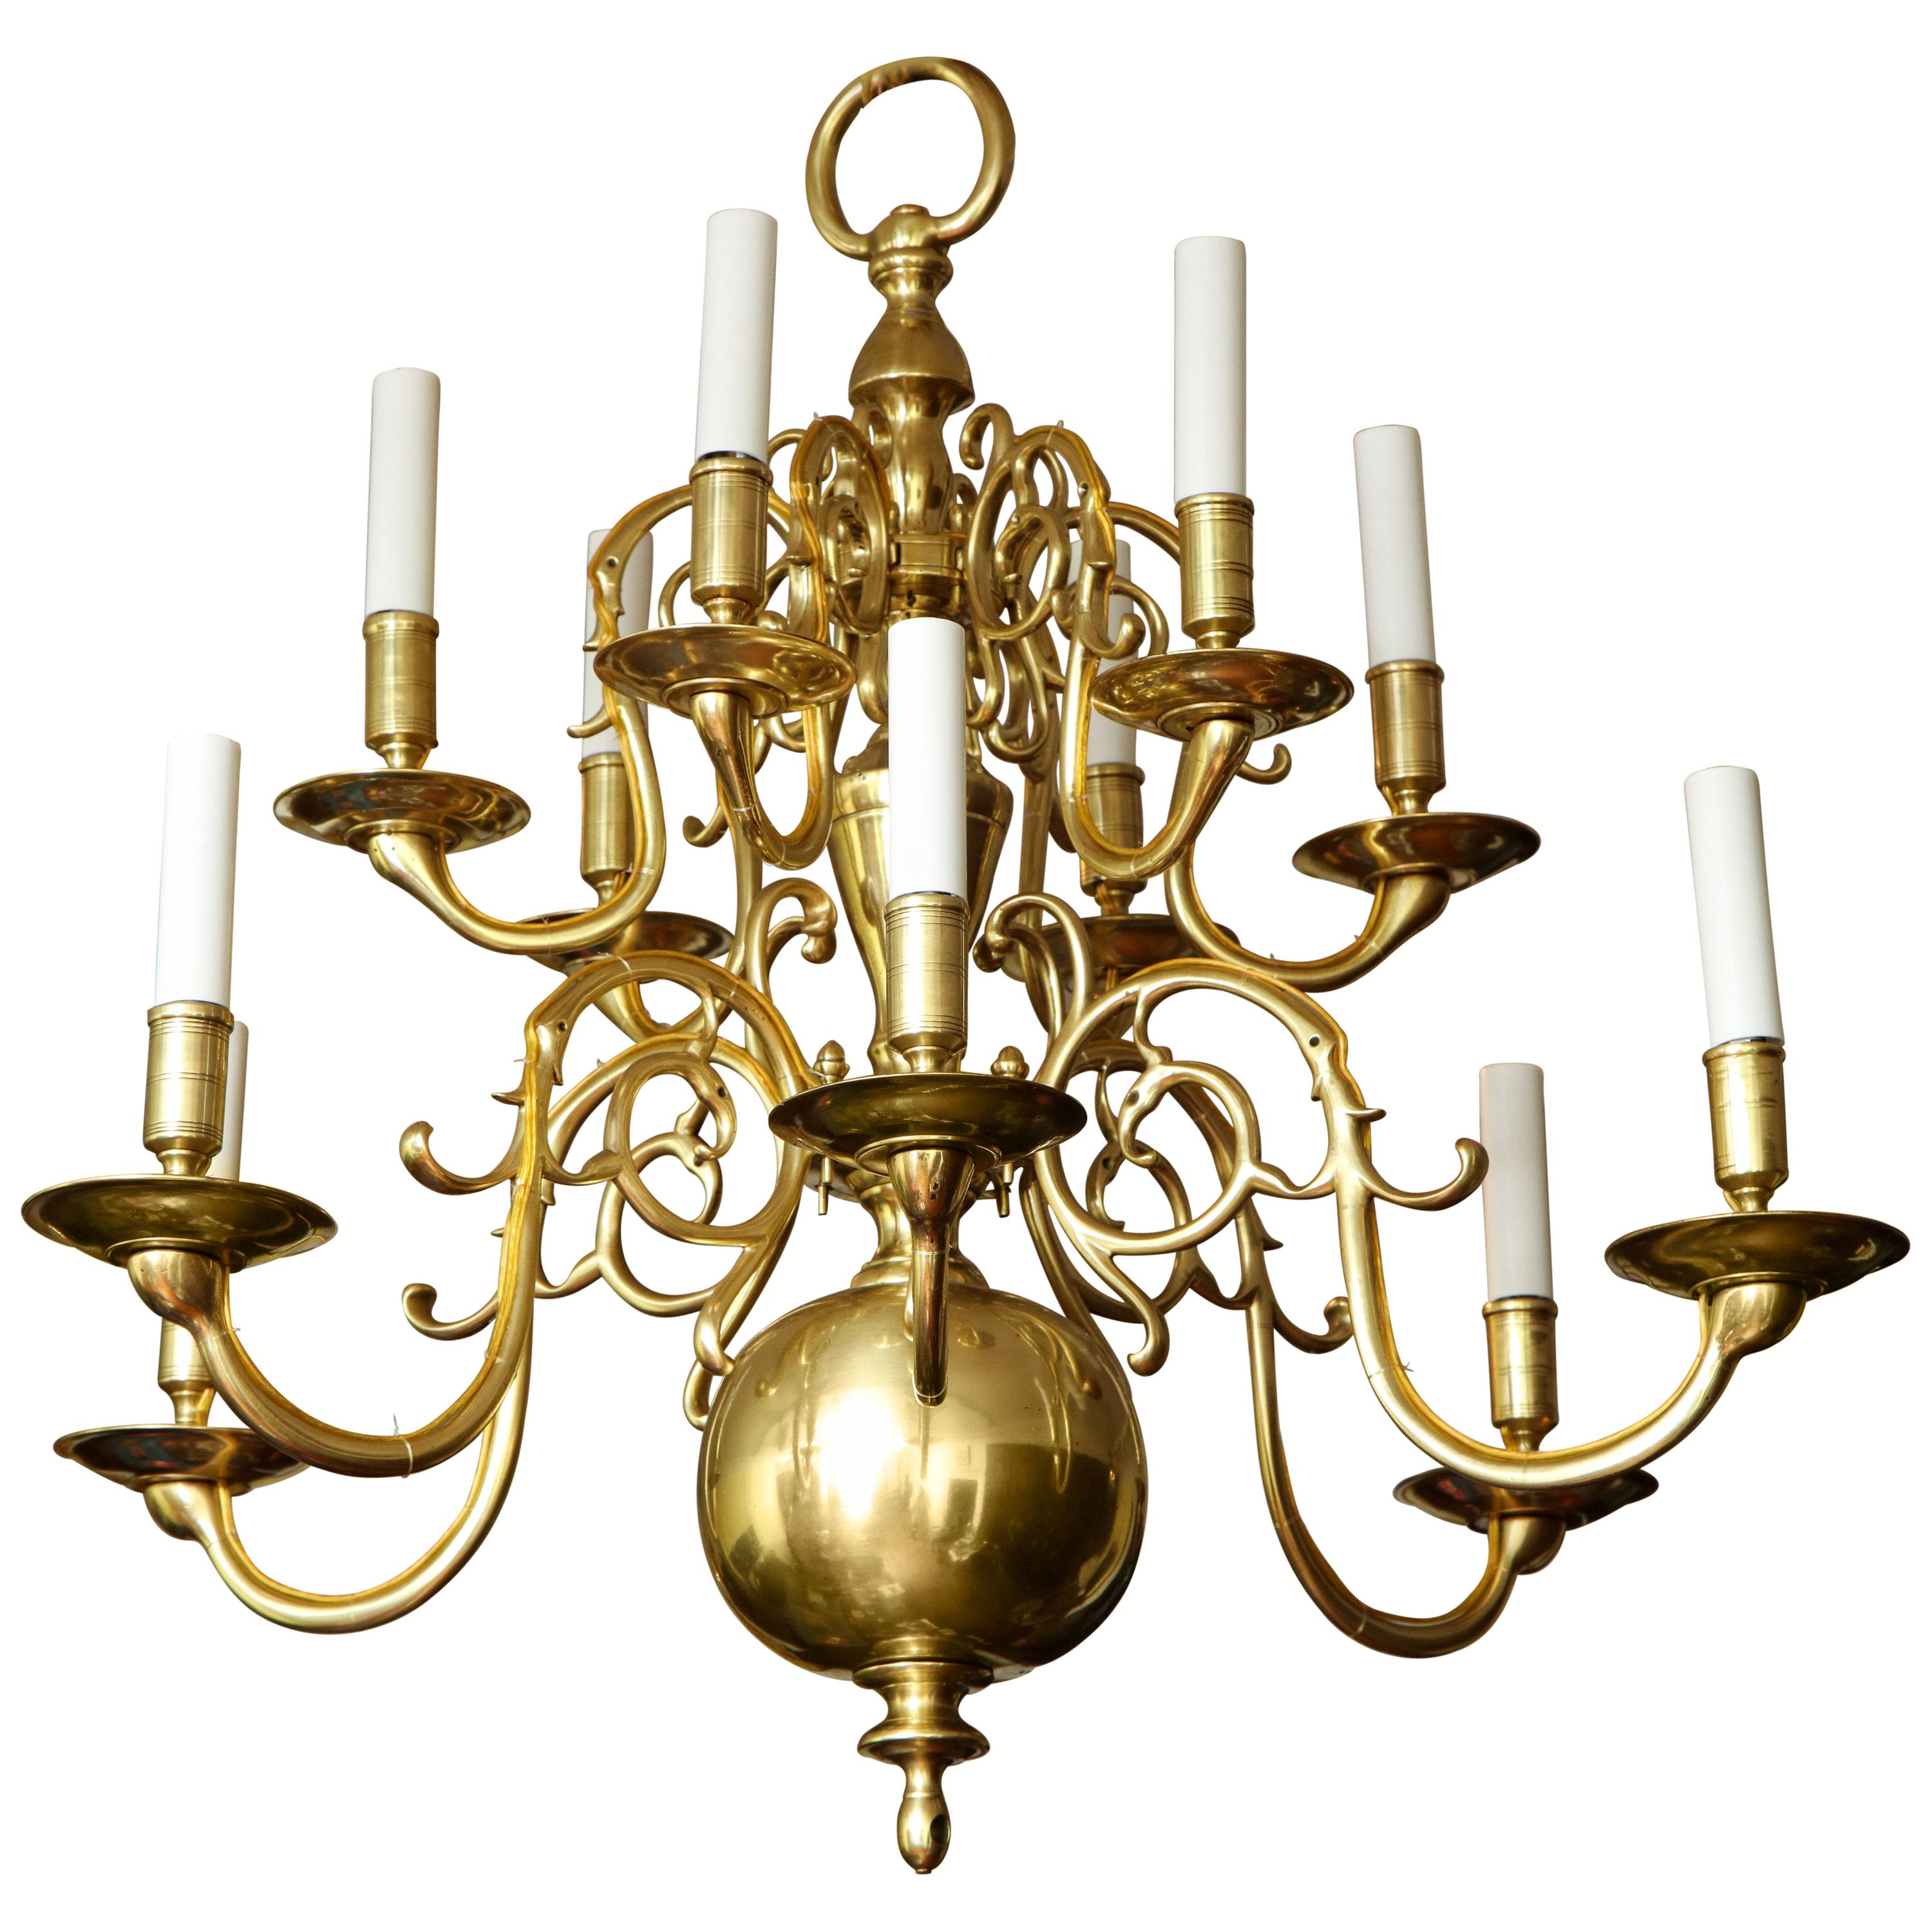 Antique Brass 12-Light Scrolled Arm Chandelier with Large Lower Ball, circa 1850 For Sale